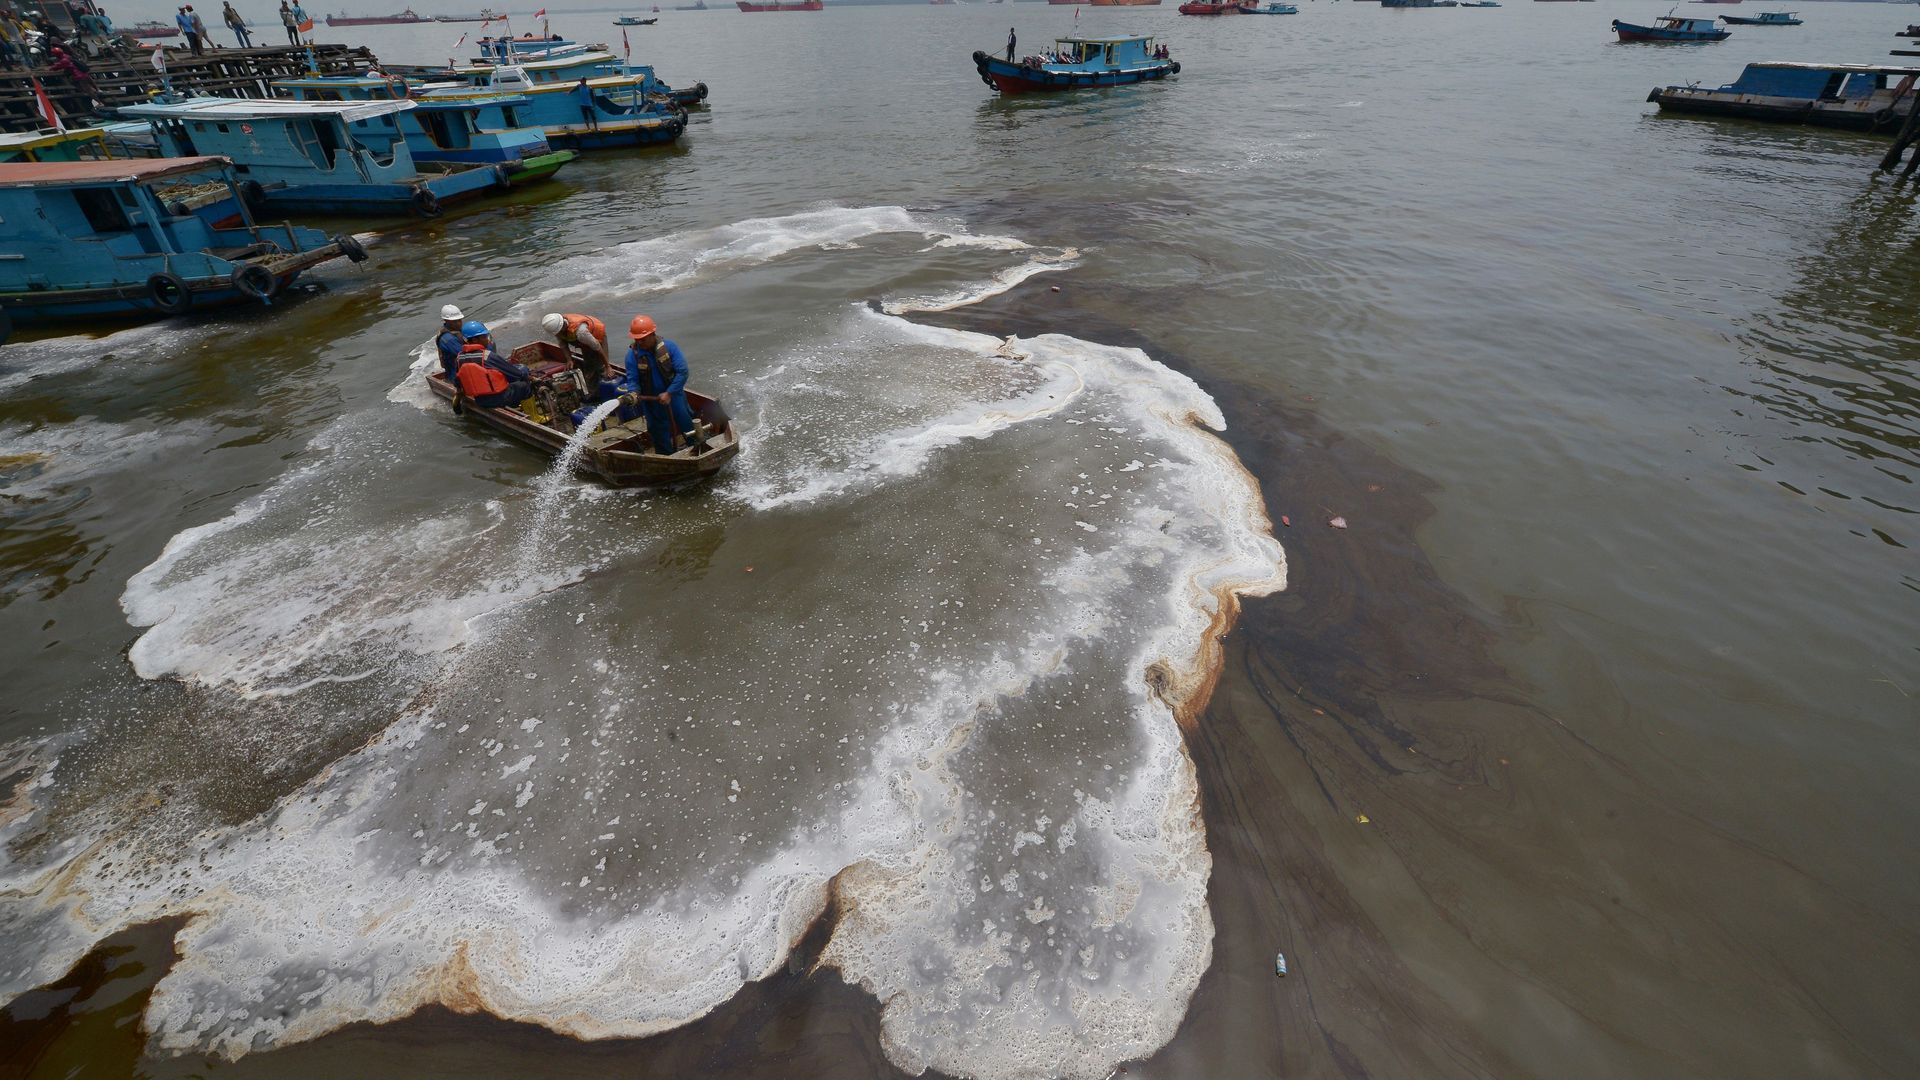 Indonesian workers trying to clean an oil spill from the sea in Balikpapan.